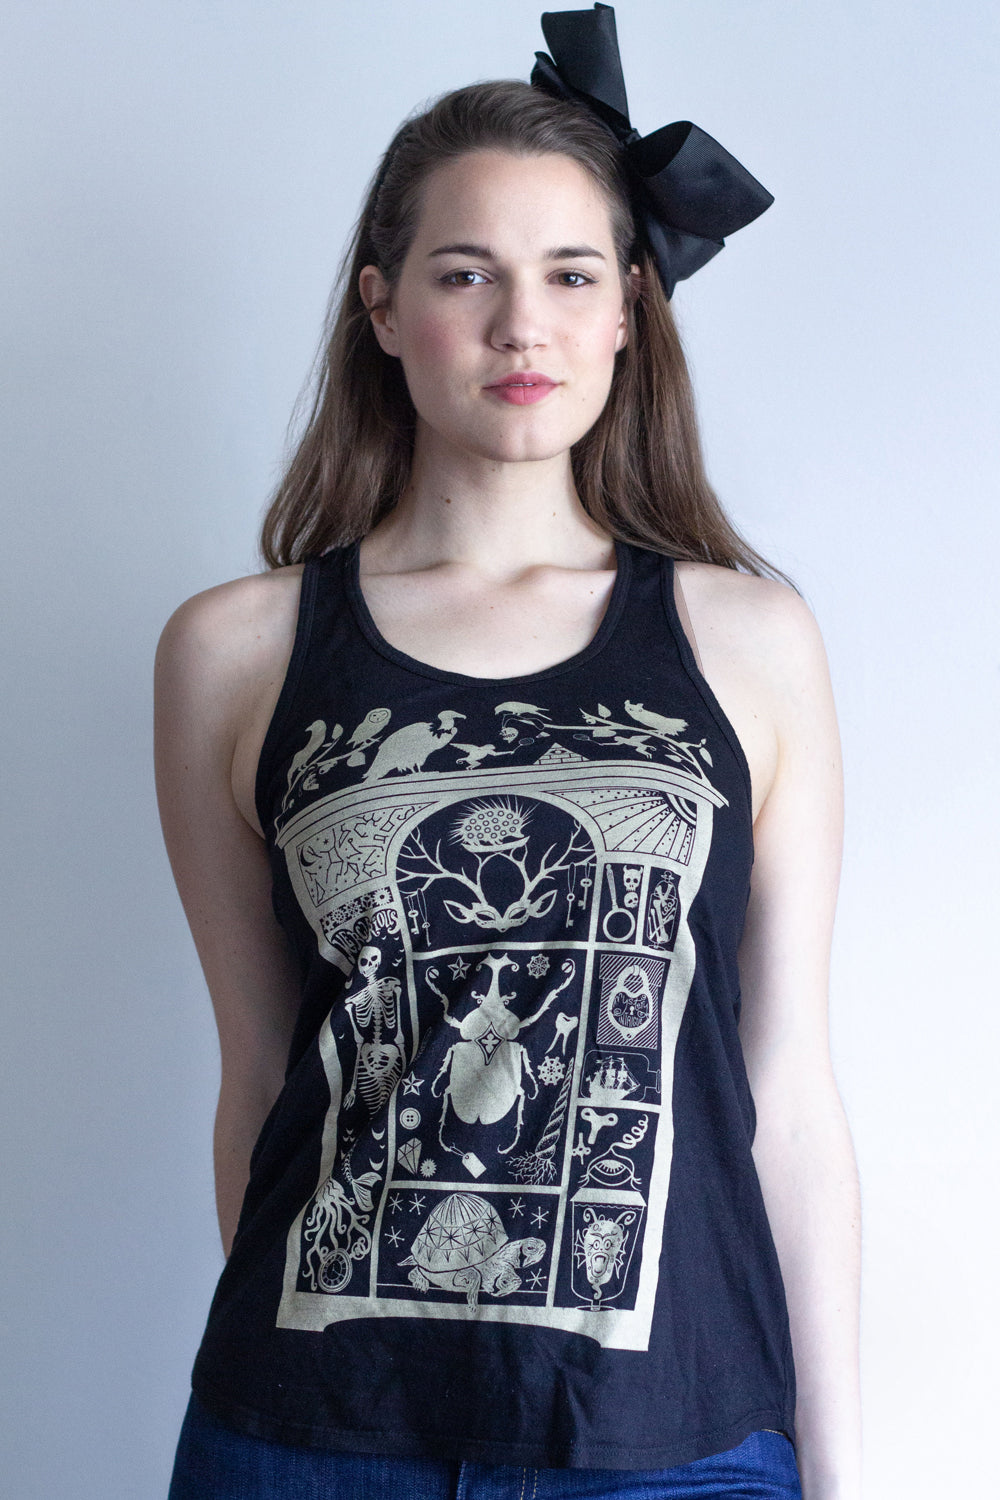 Black racerback tank with off-white print of cabinet of curiosities with beetle, skeletons, owls